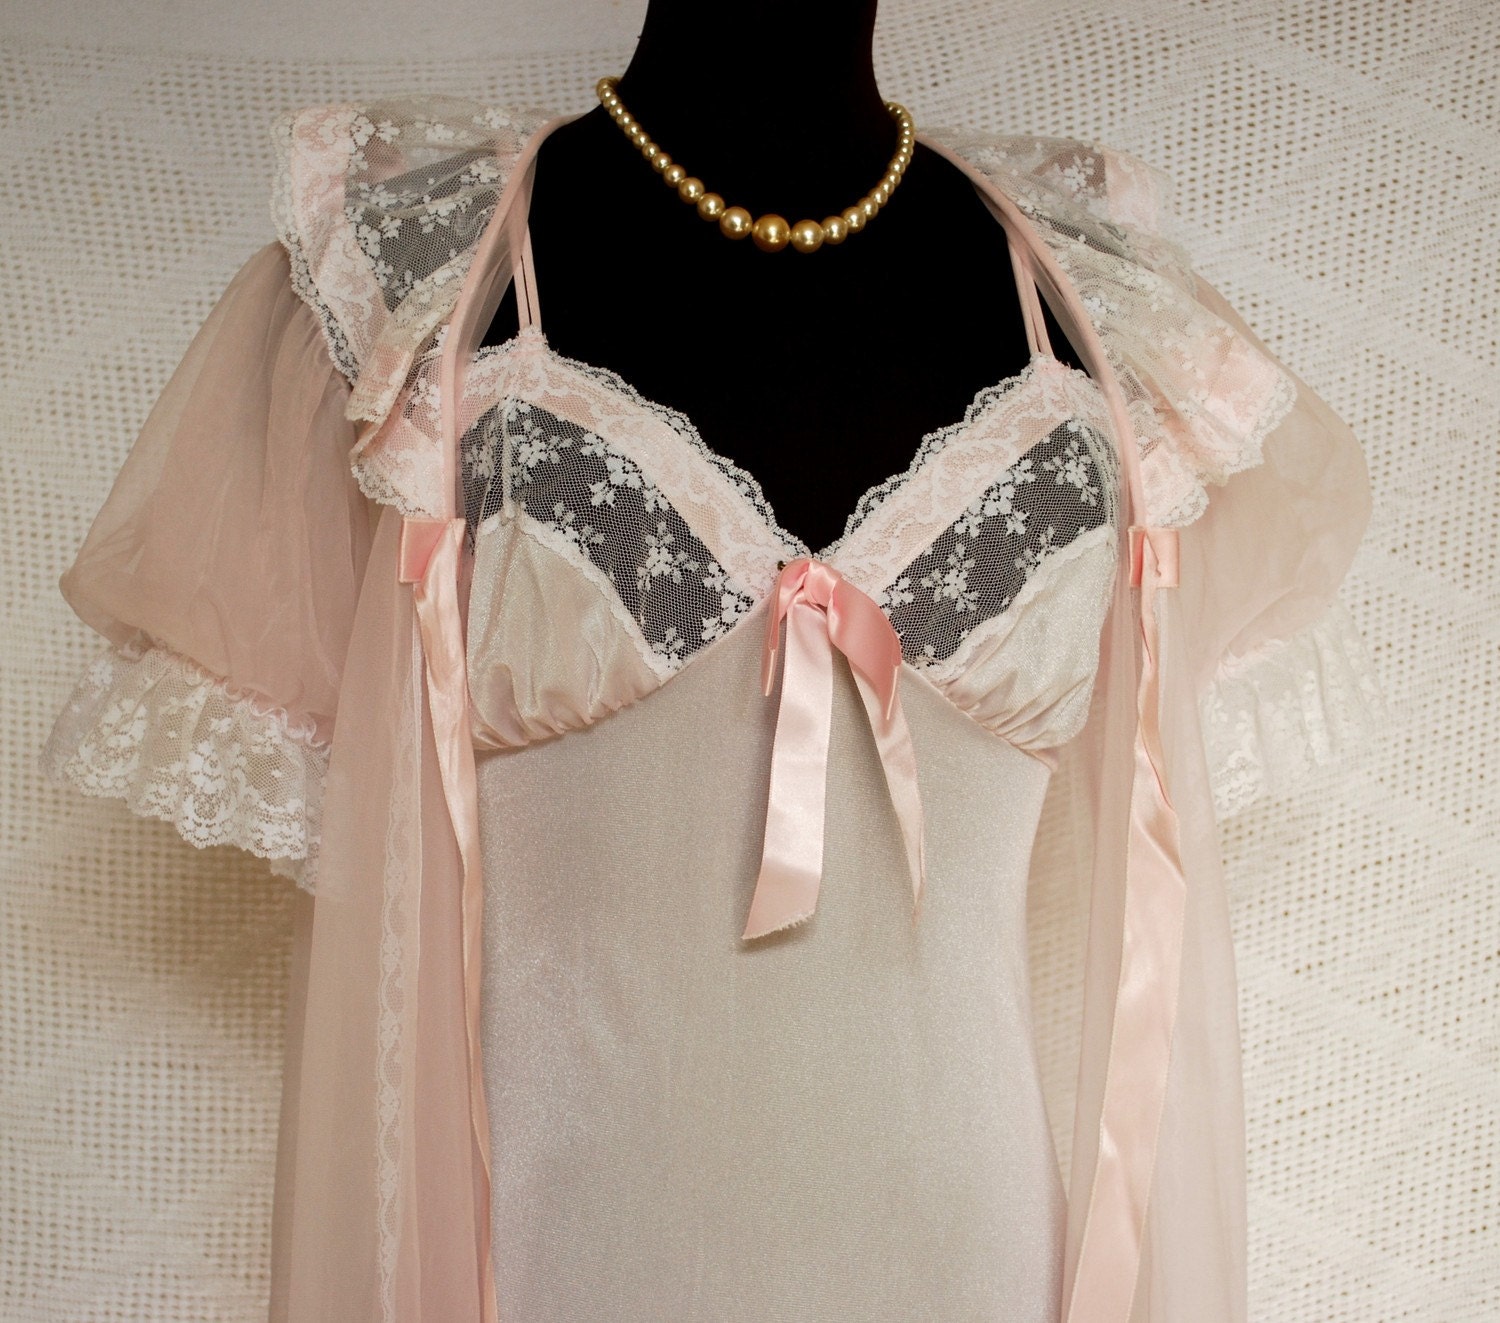 Vintage 1970s Val Mode Pink Frilly Peignoir Set by IntimateRetreat